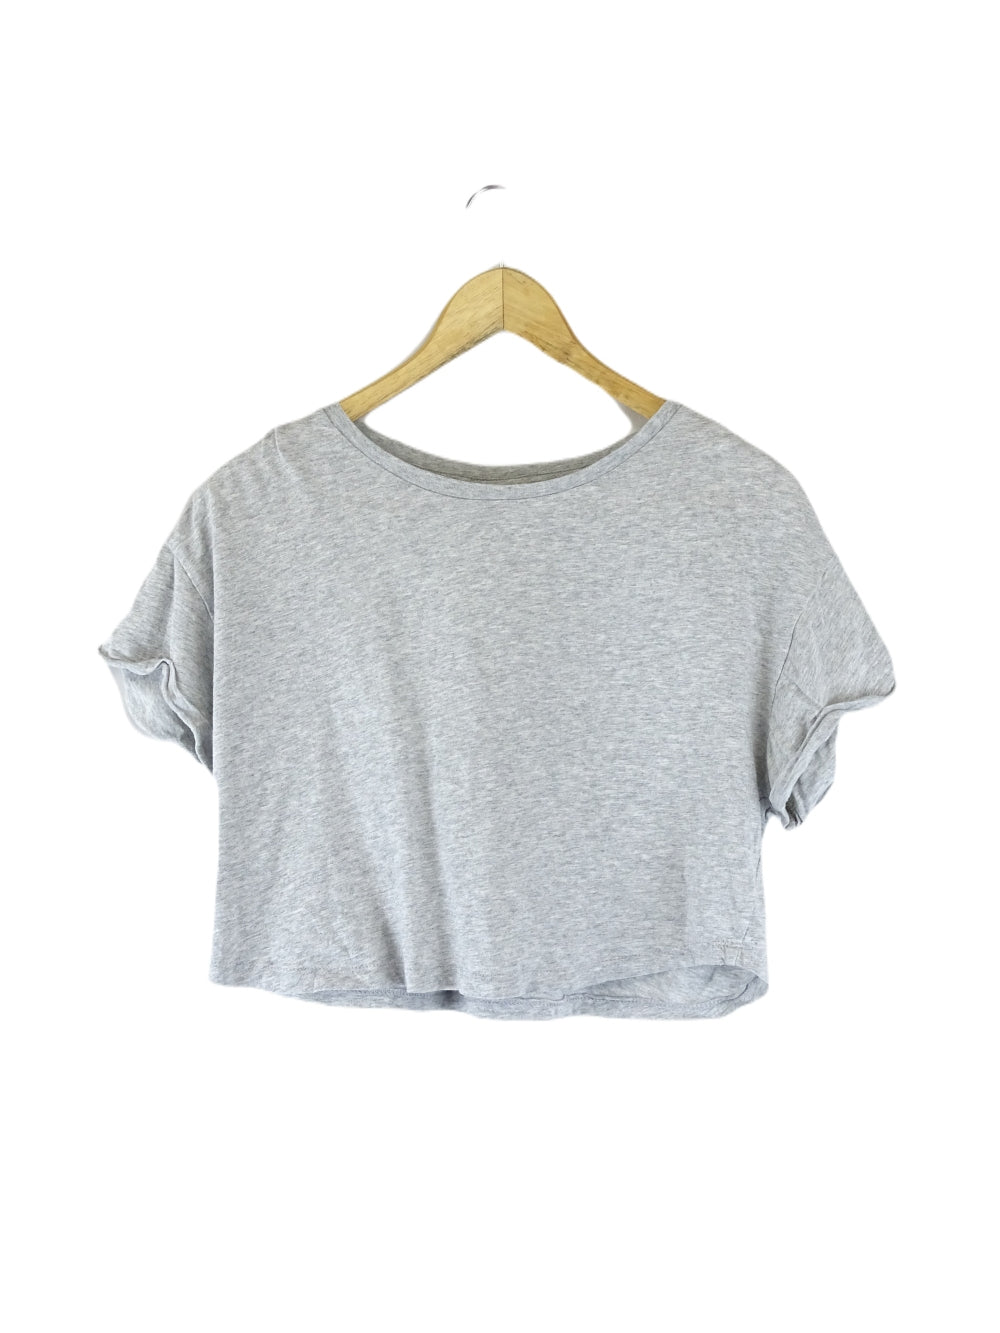 Silent Theory Grey Cropped T-Shirt 10